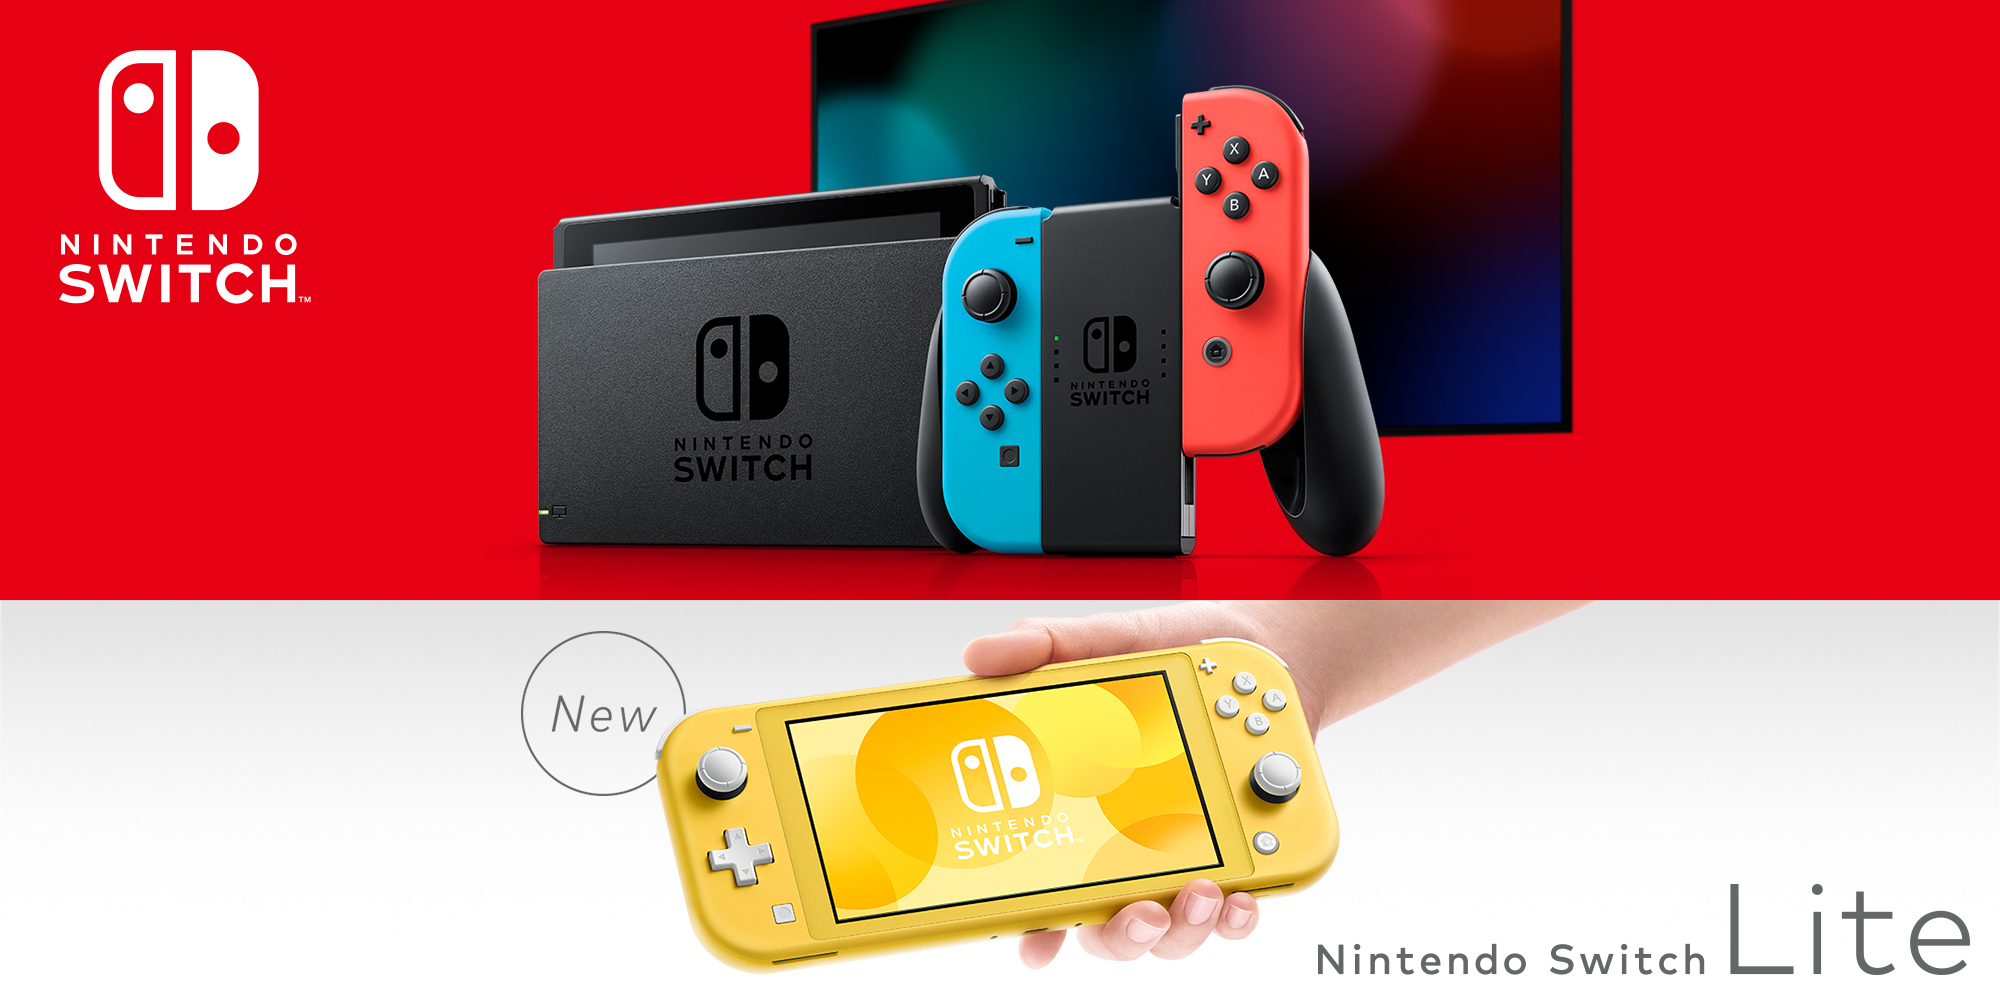 Nintendo introduces Nintendo Switch Lite, a device dedicated to handheld game play